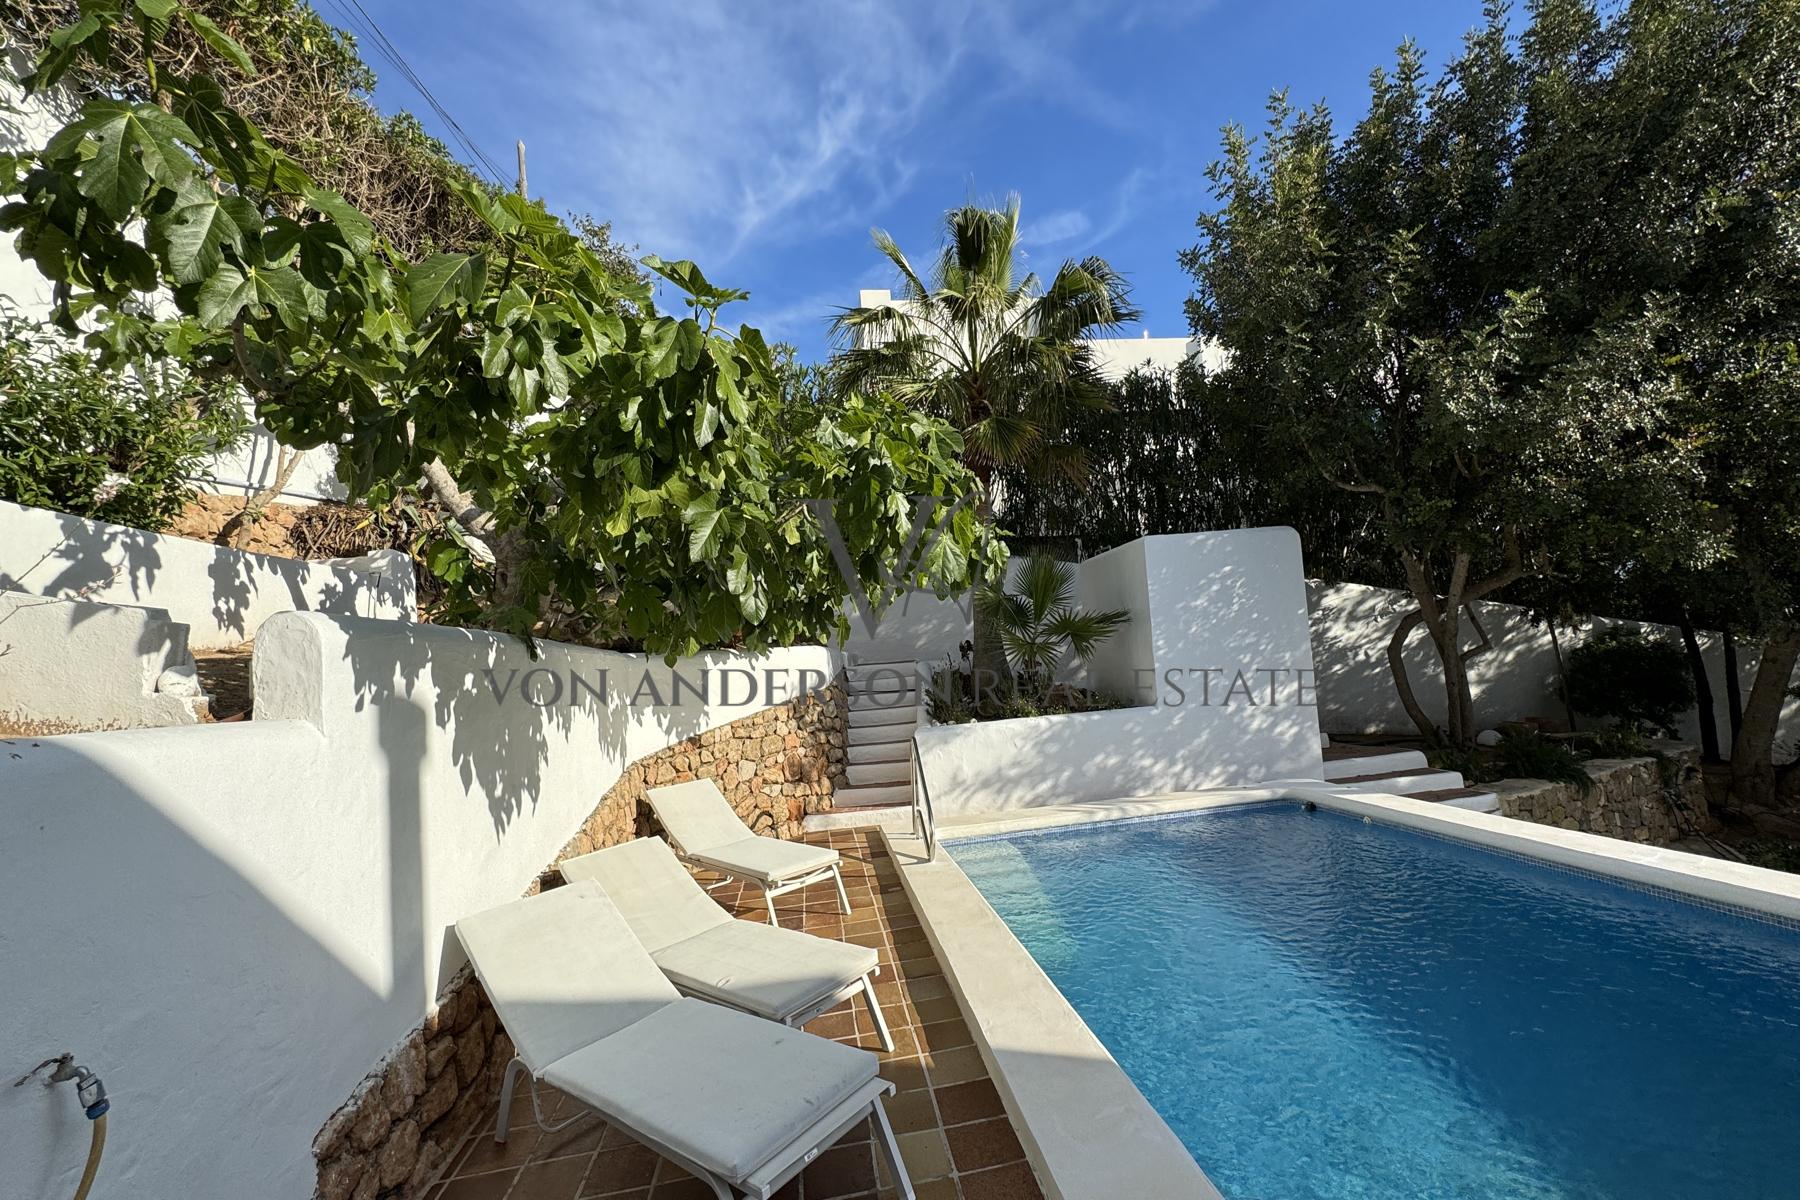 Homely Traditional Villa with Two Apartments Boasting Sea & Captivating Sunsets, ref. VA1058, for sale in Ibiza by Von Anderson Real Estate